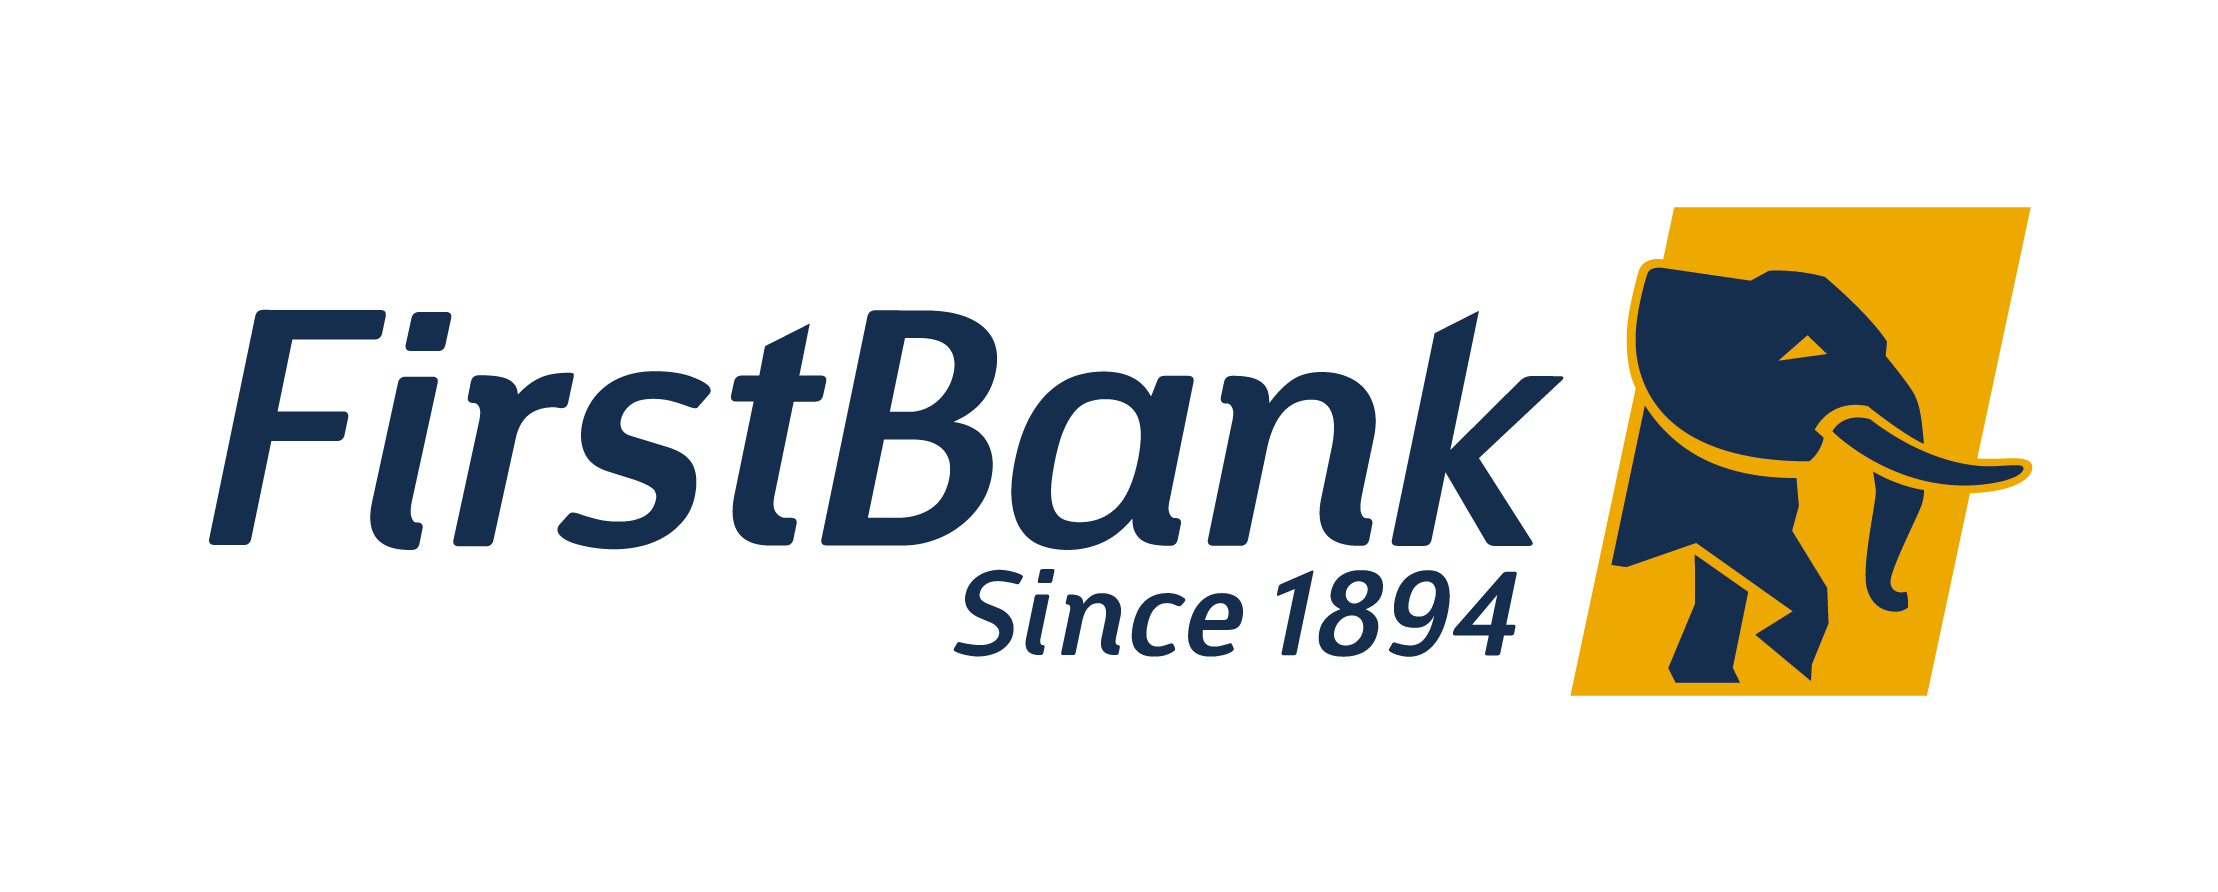 First Bank of Nigeria Recruitment 2021/2022 Latest Application Update